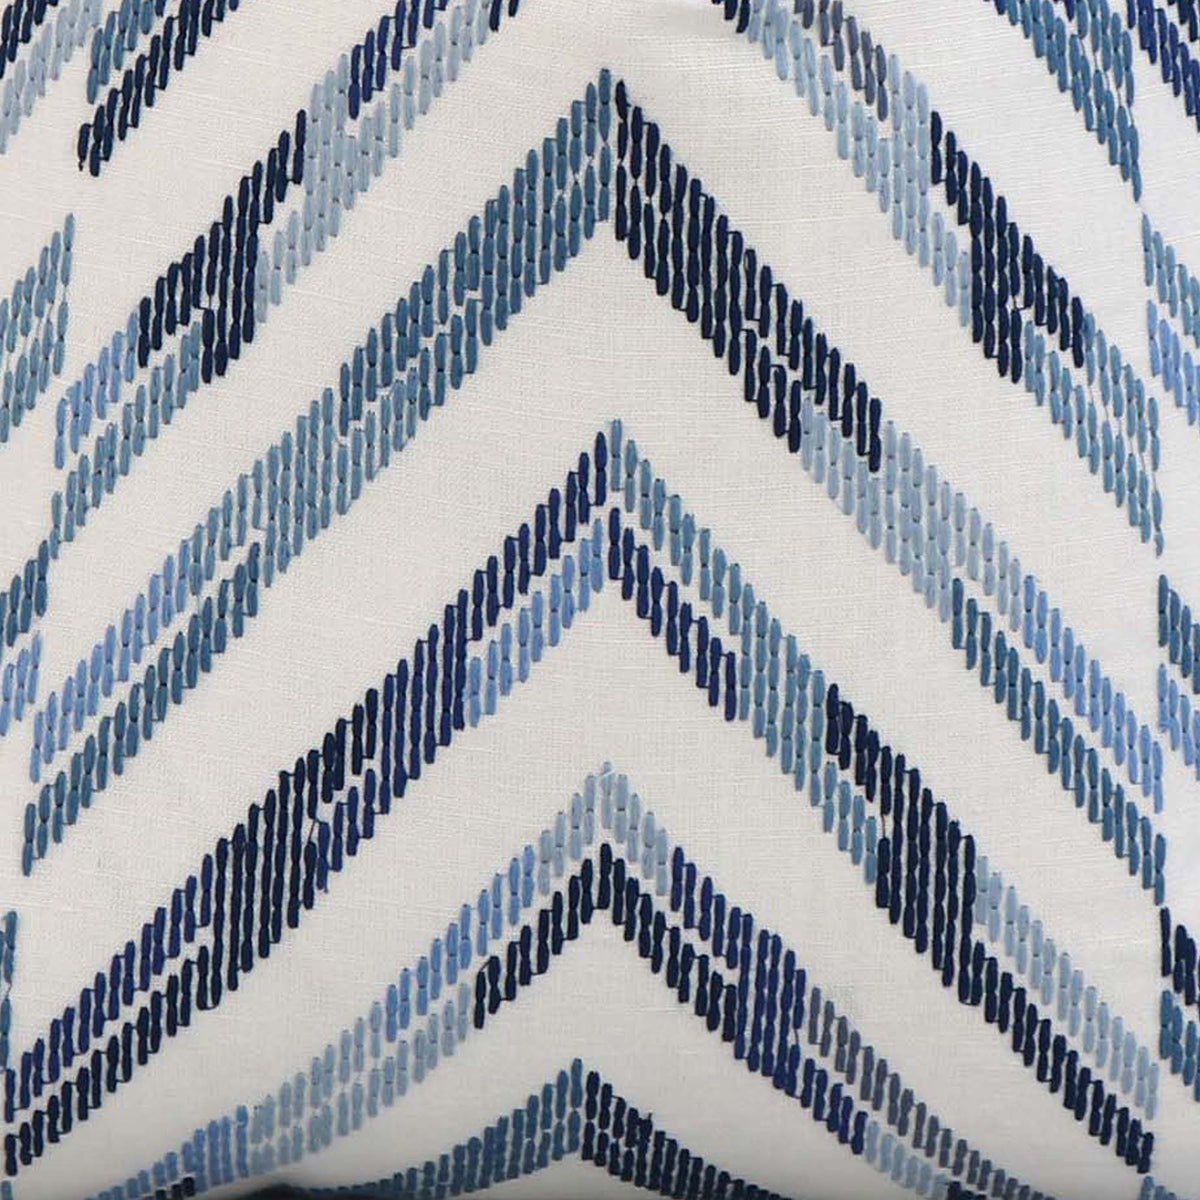 Hamilton Textured Blue and White / 4x4 inch Fabric Swatch